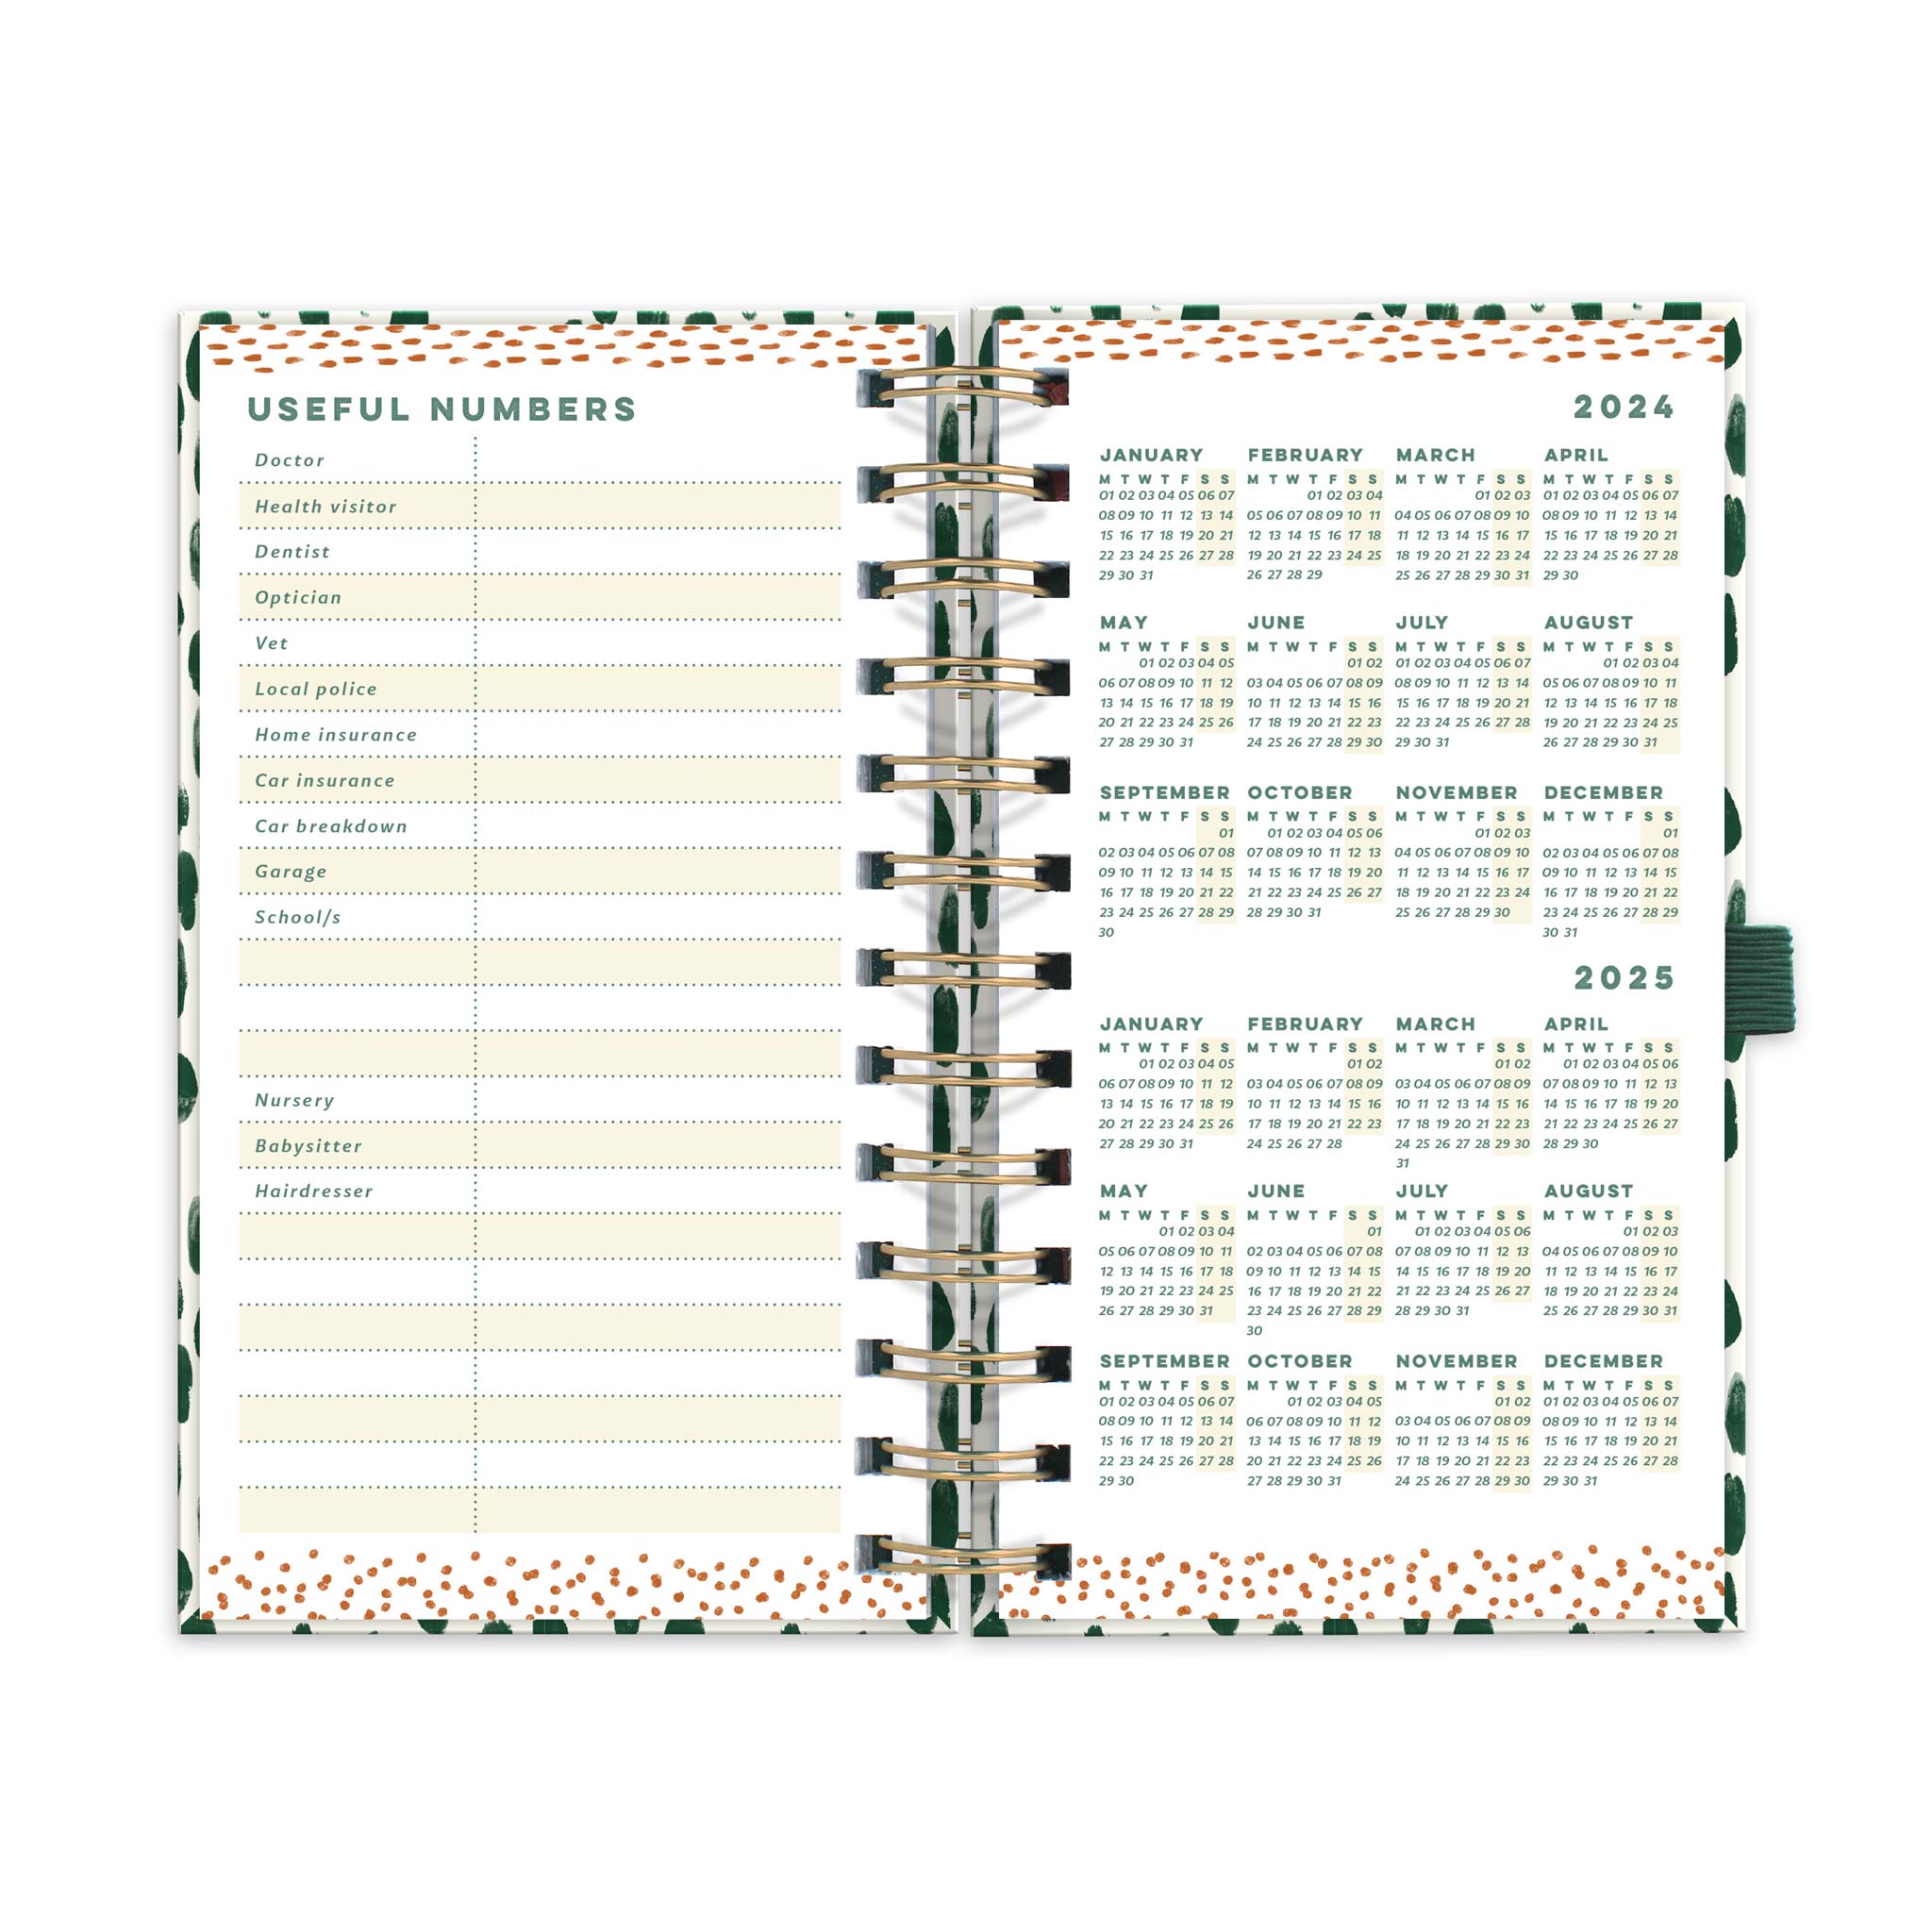 An open diary planner with a useful numbers page and a page with year microcalendars for 2024 and 2024